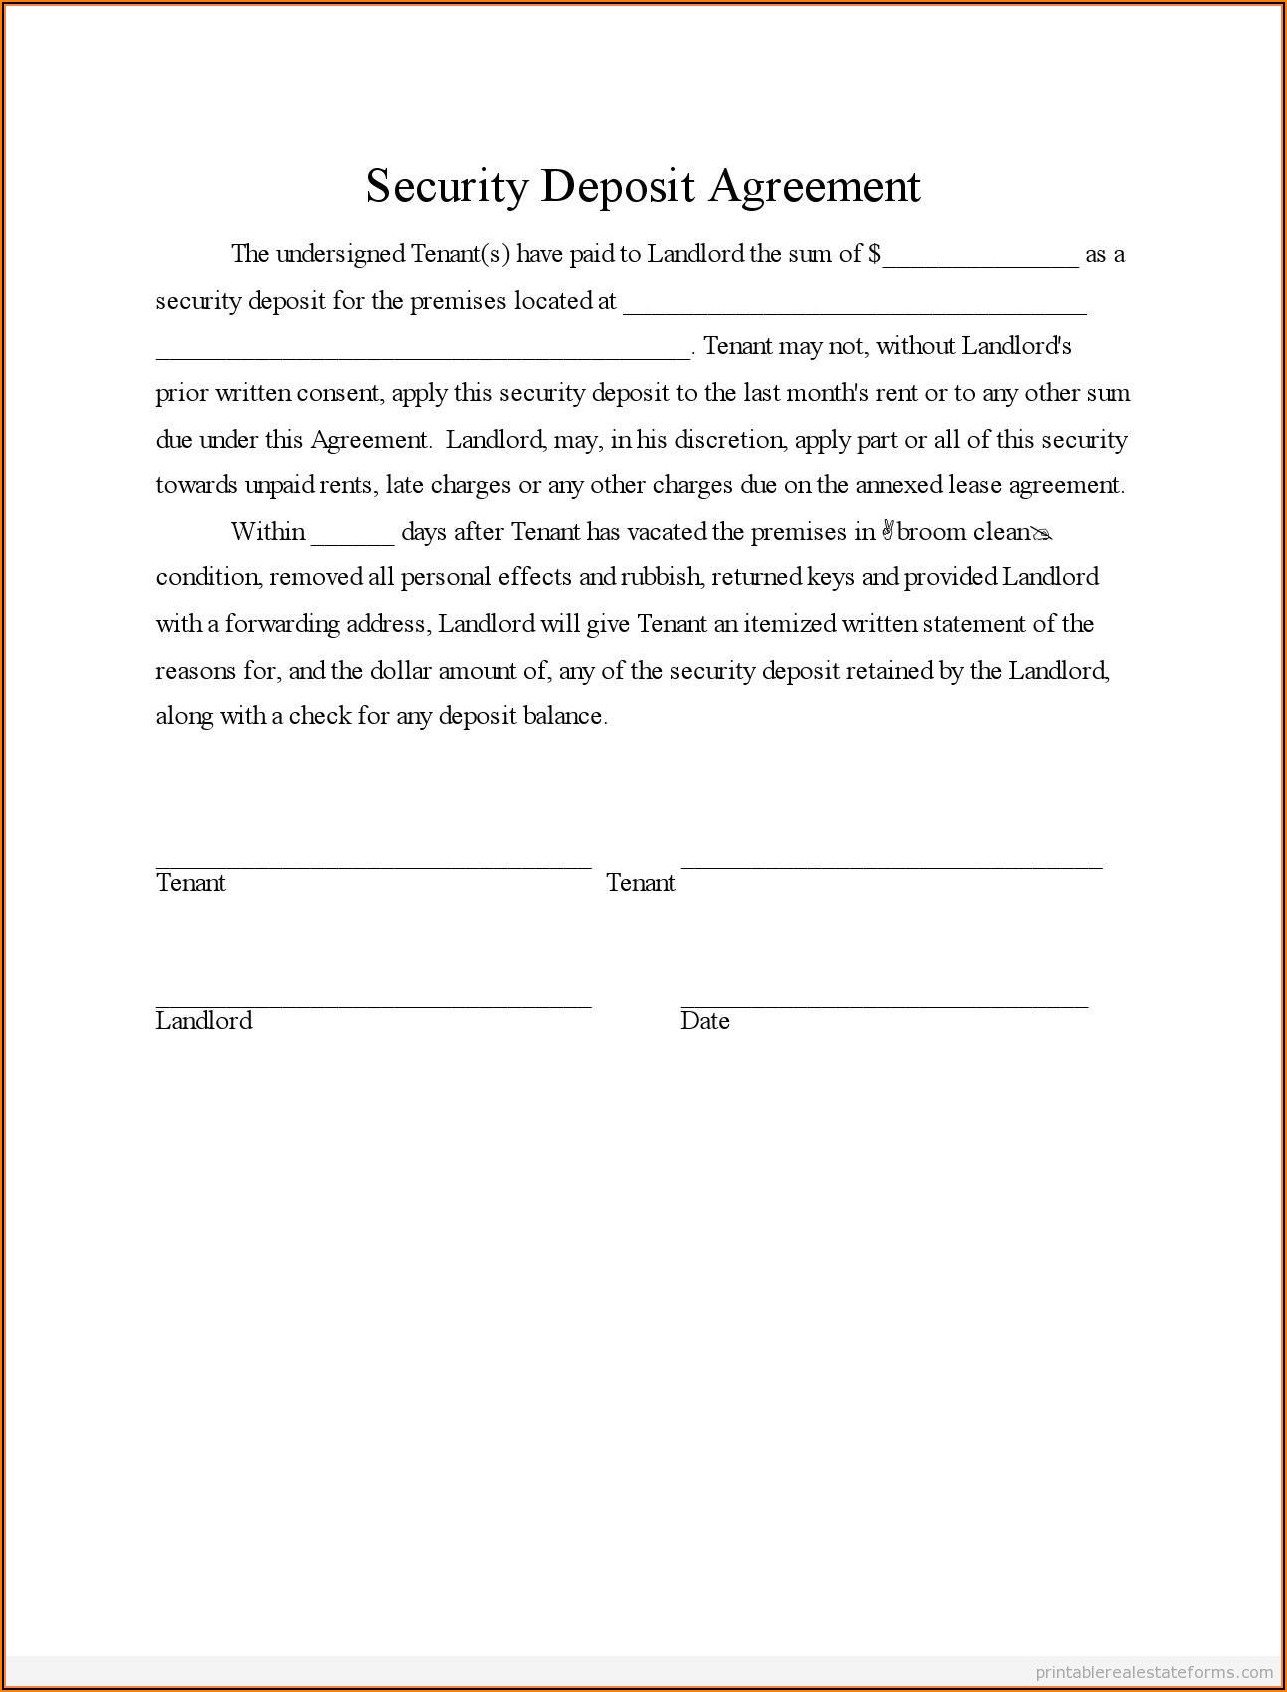 Free Security Deposit Agreement Form